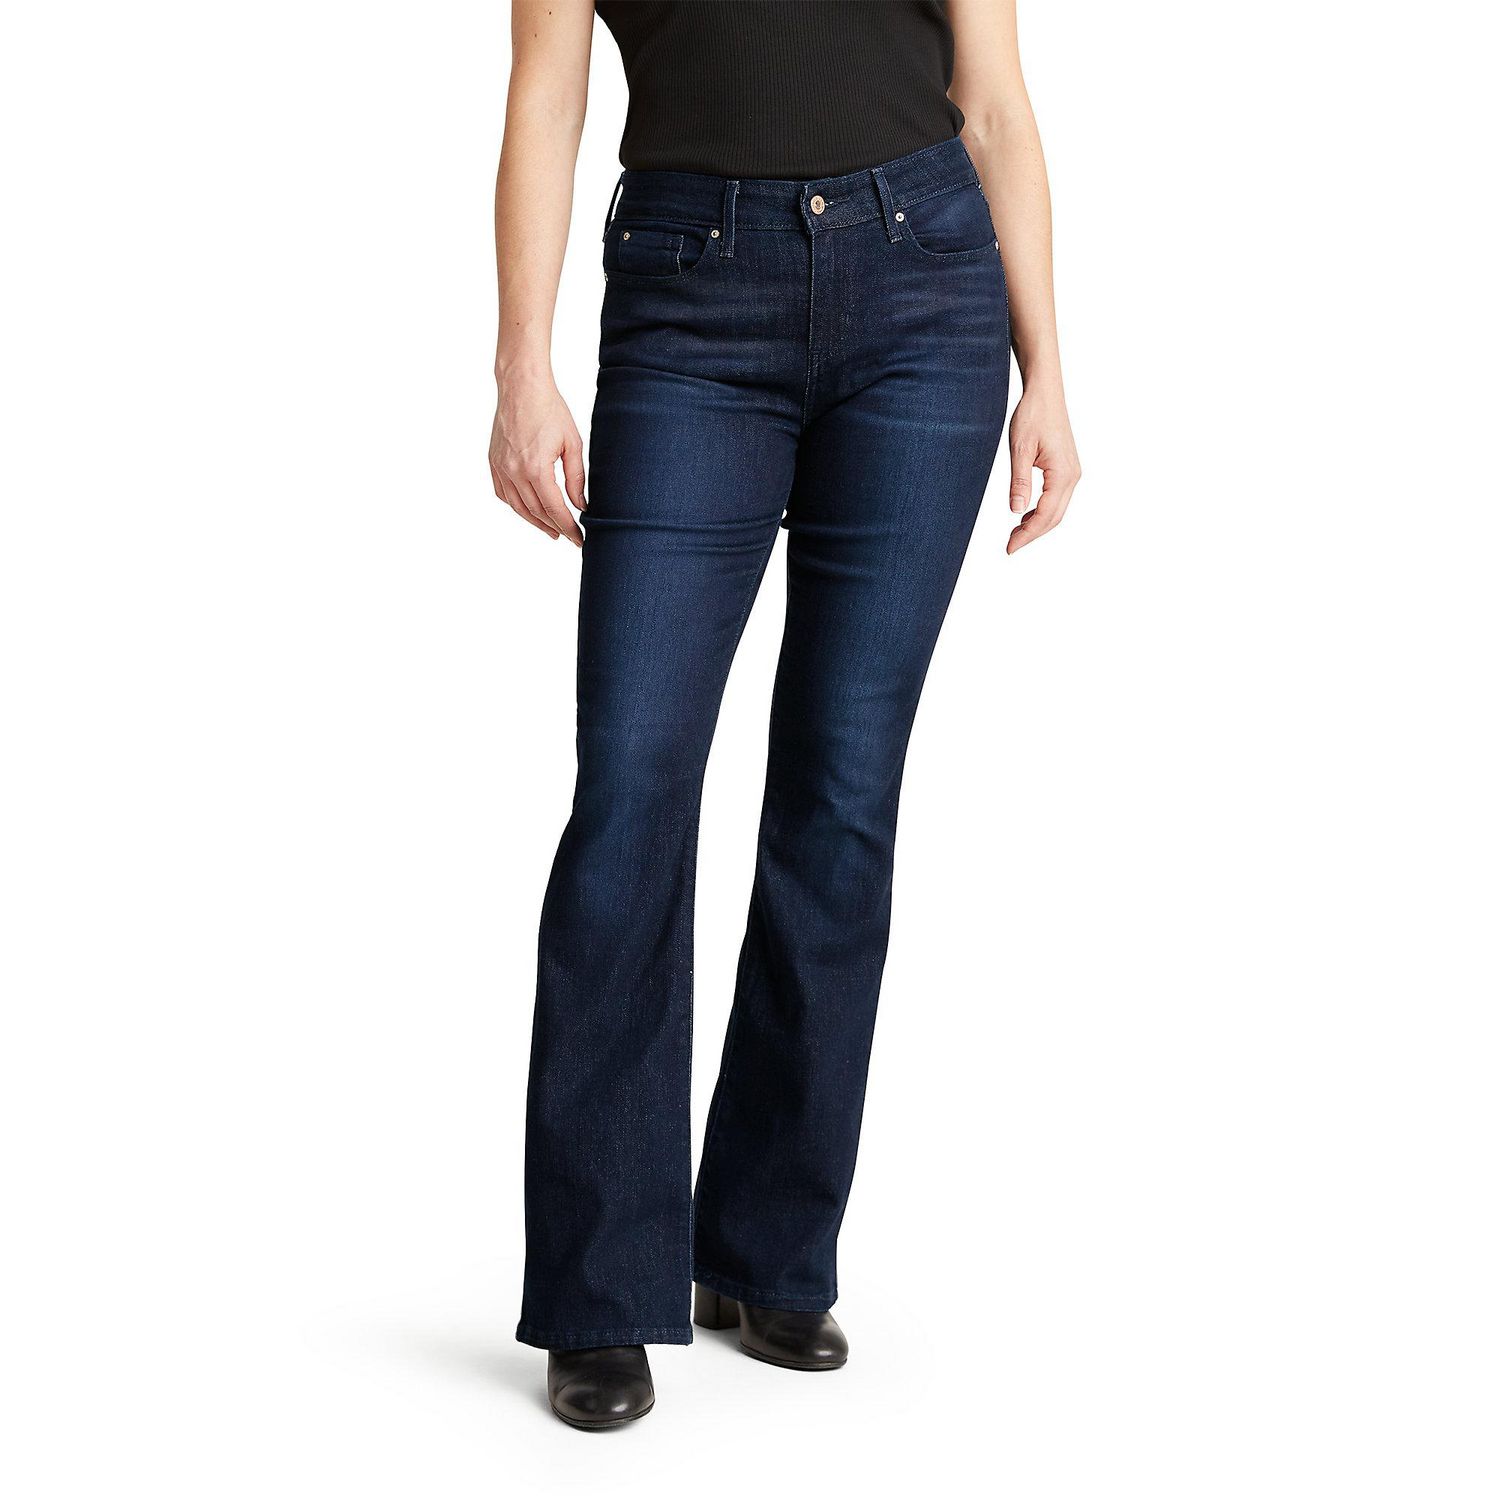 Bootcut Jeans for Women